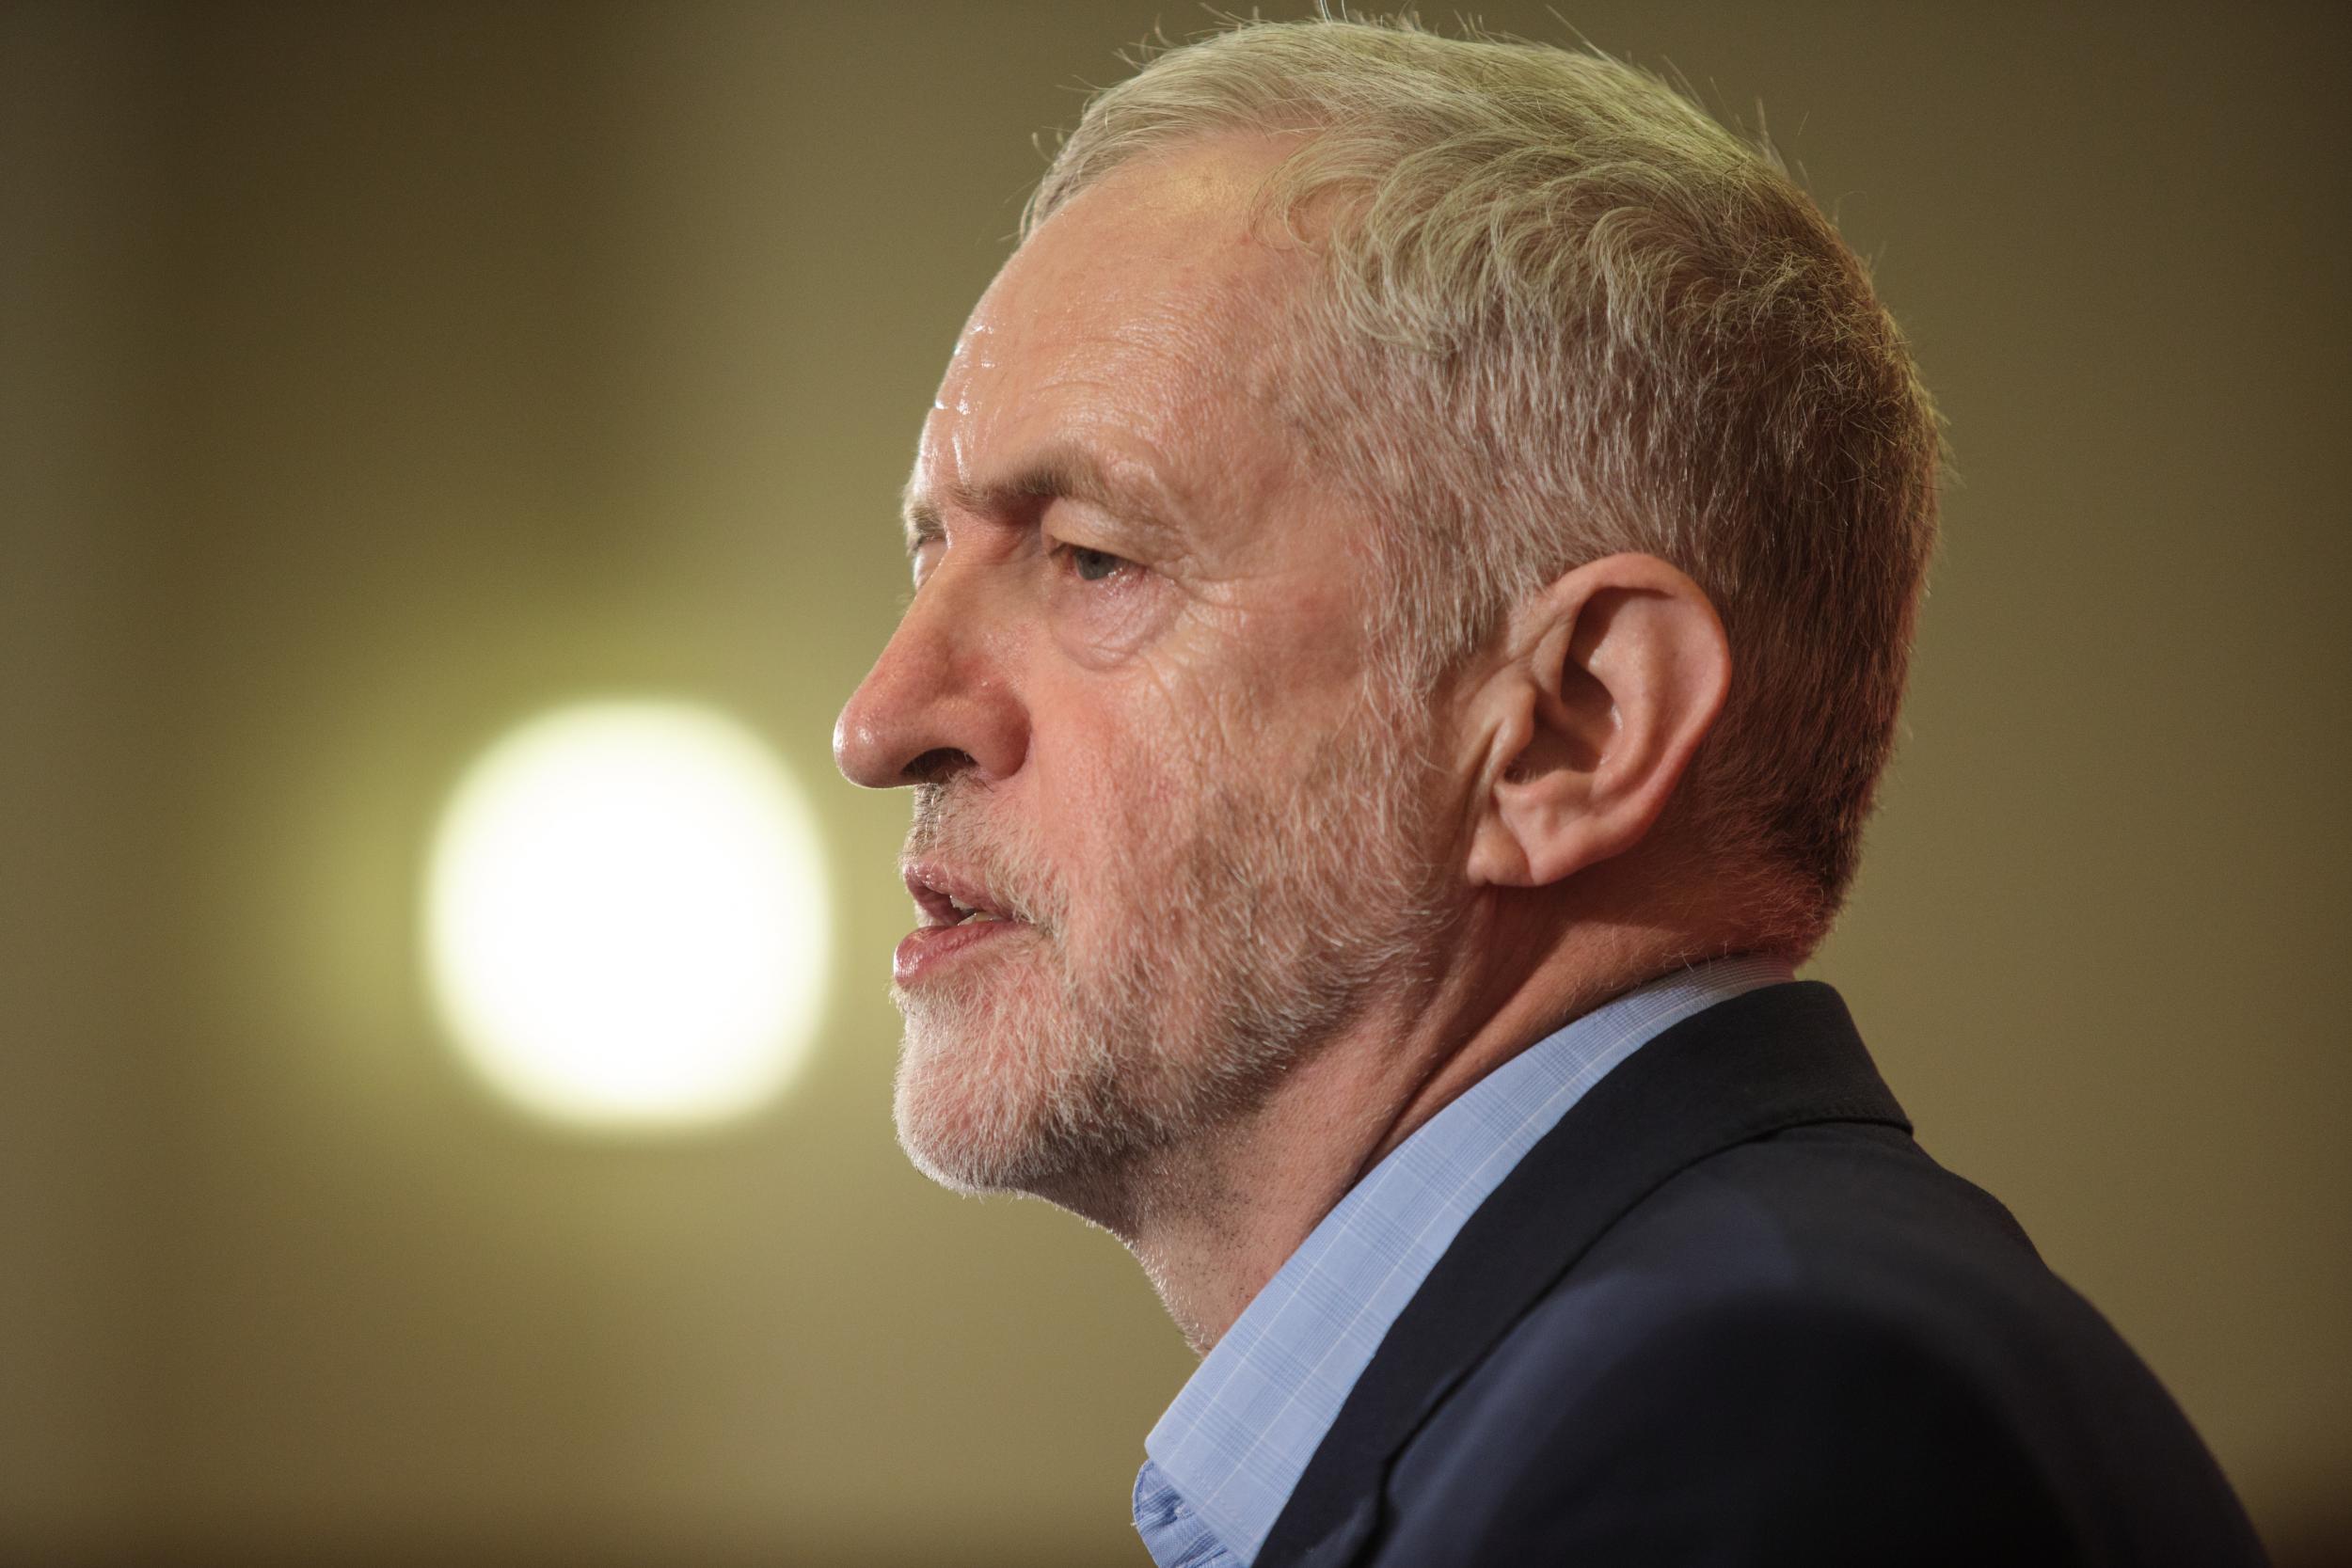 A little over half of Labour’s 2015 voters say they now support the party led by Jeremy Corbyn